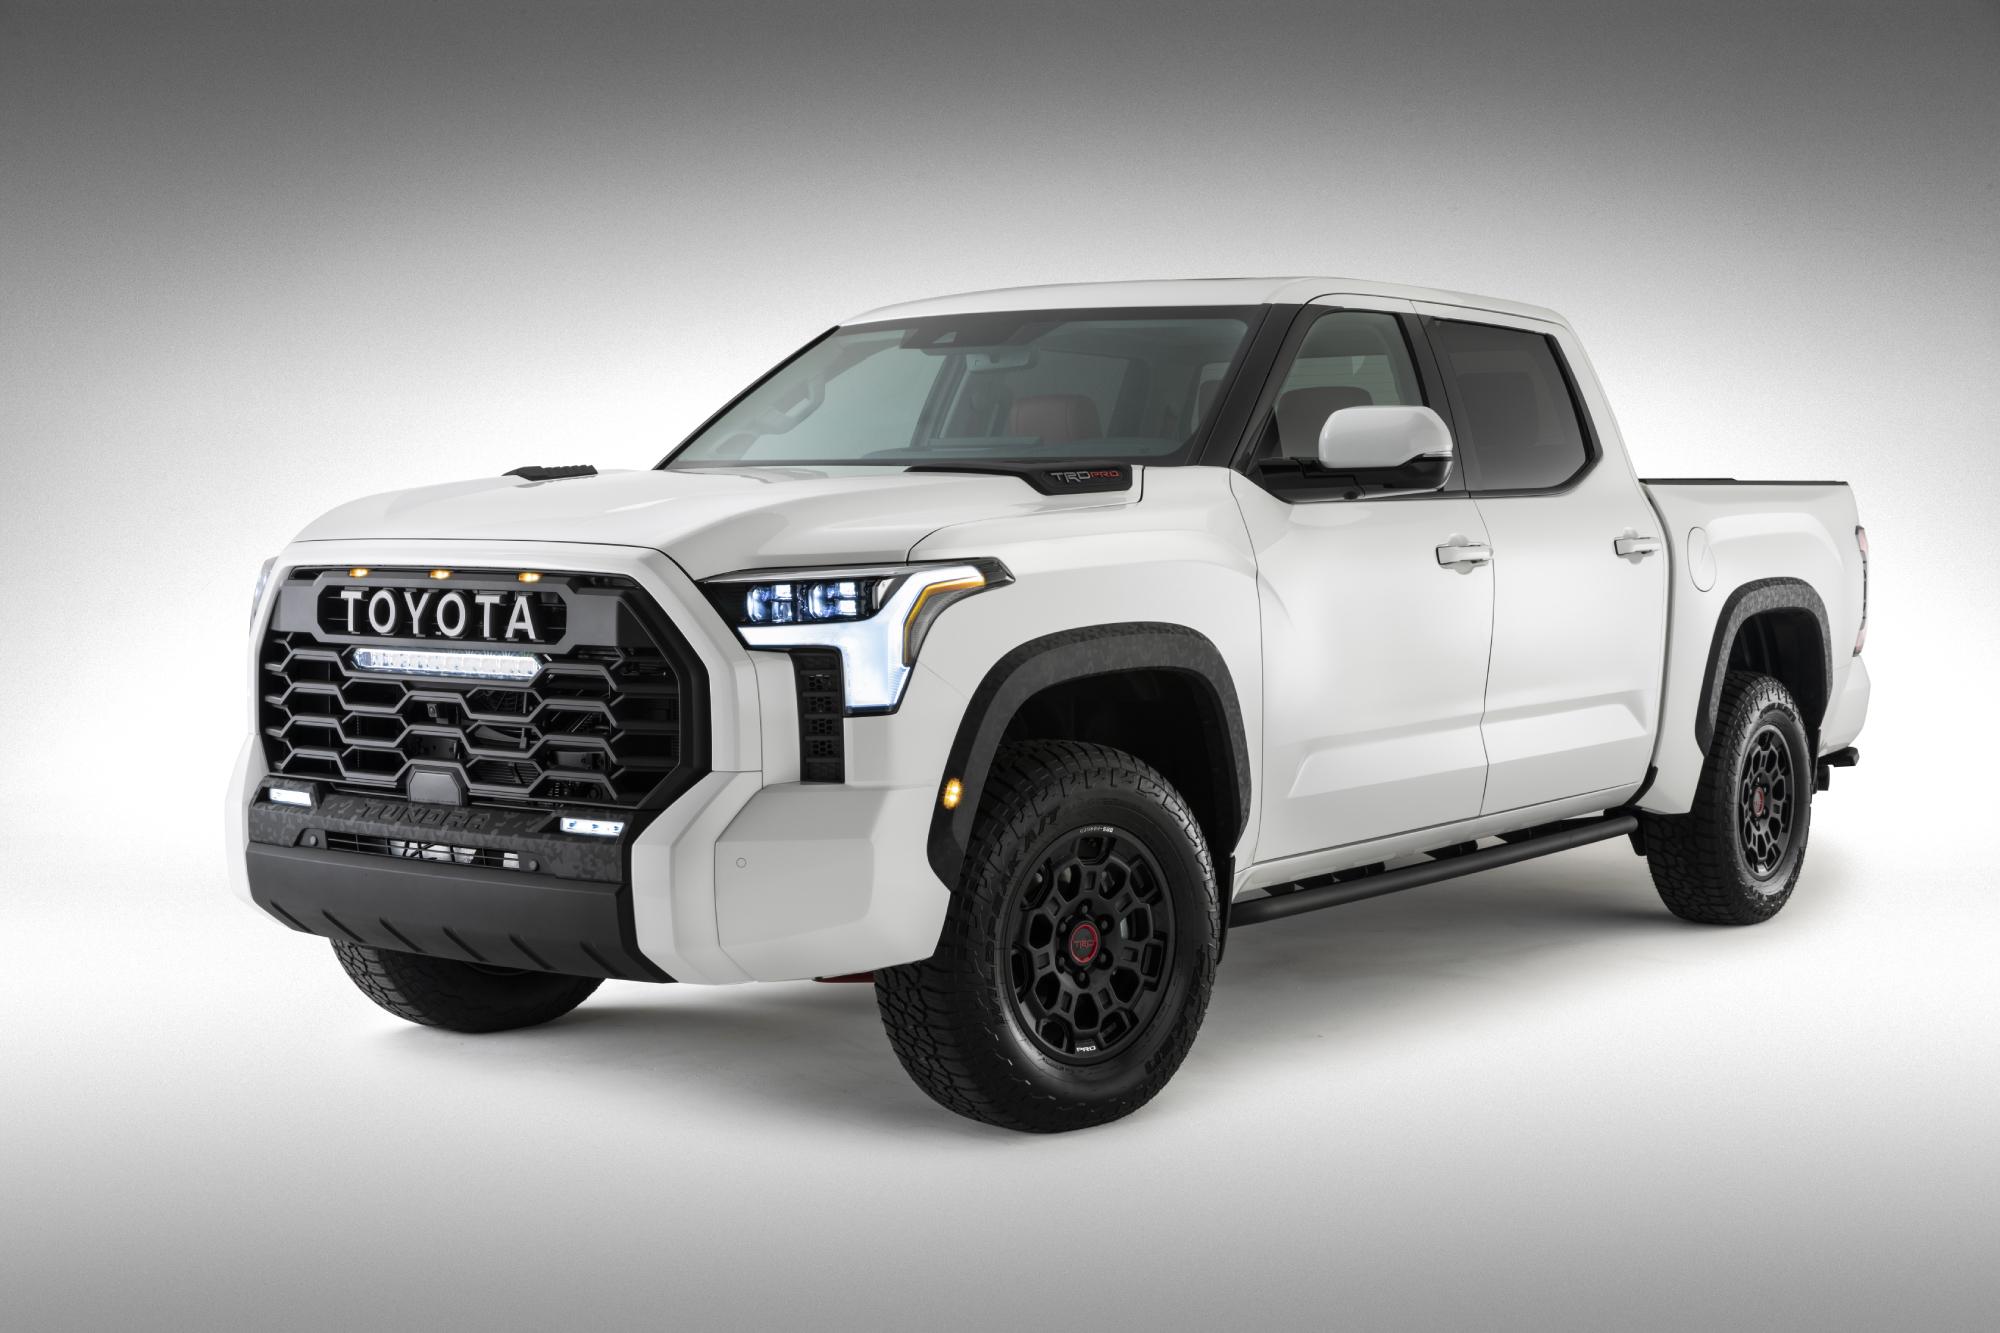 The 2022 Tundra TRD Pro is packed with towing and off-roading upgrades and a hybrid-electric powertrain.